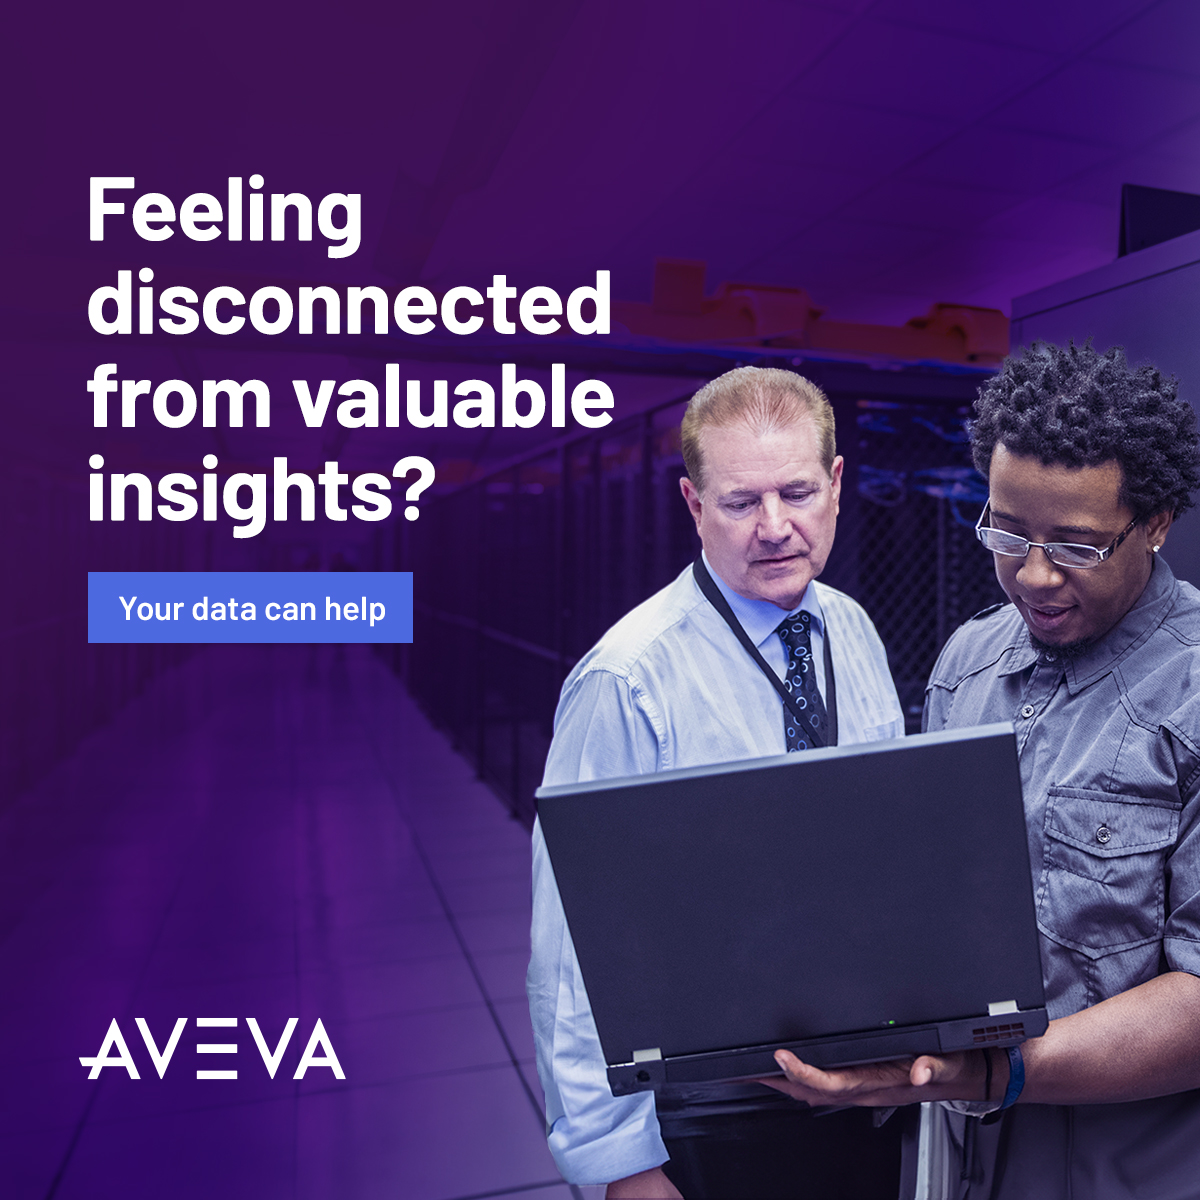 Bridge the gaps in your industrial 🏭 ecosystem and gain a 360° view of your #operations for faster, smarter business decisions.

Learn more about AVEVA Connect’s new features and advanced data services . Read the blog ➡️ bit.ly/3vPXK6U #cloud #datasharing #AVEVAConnect